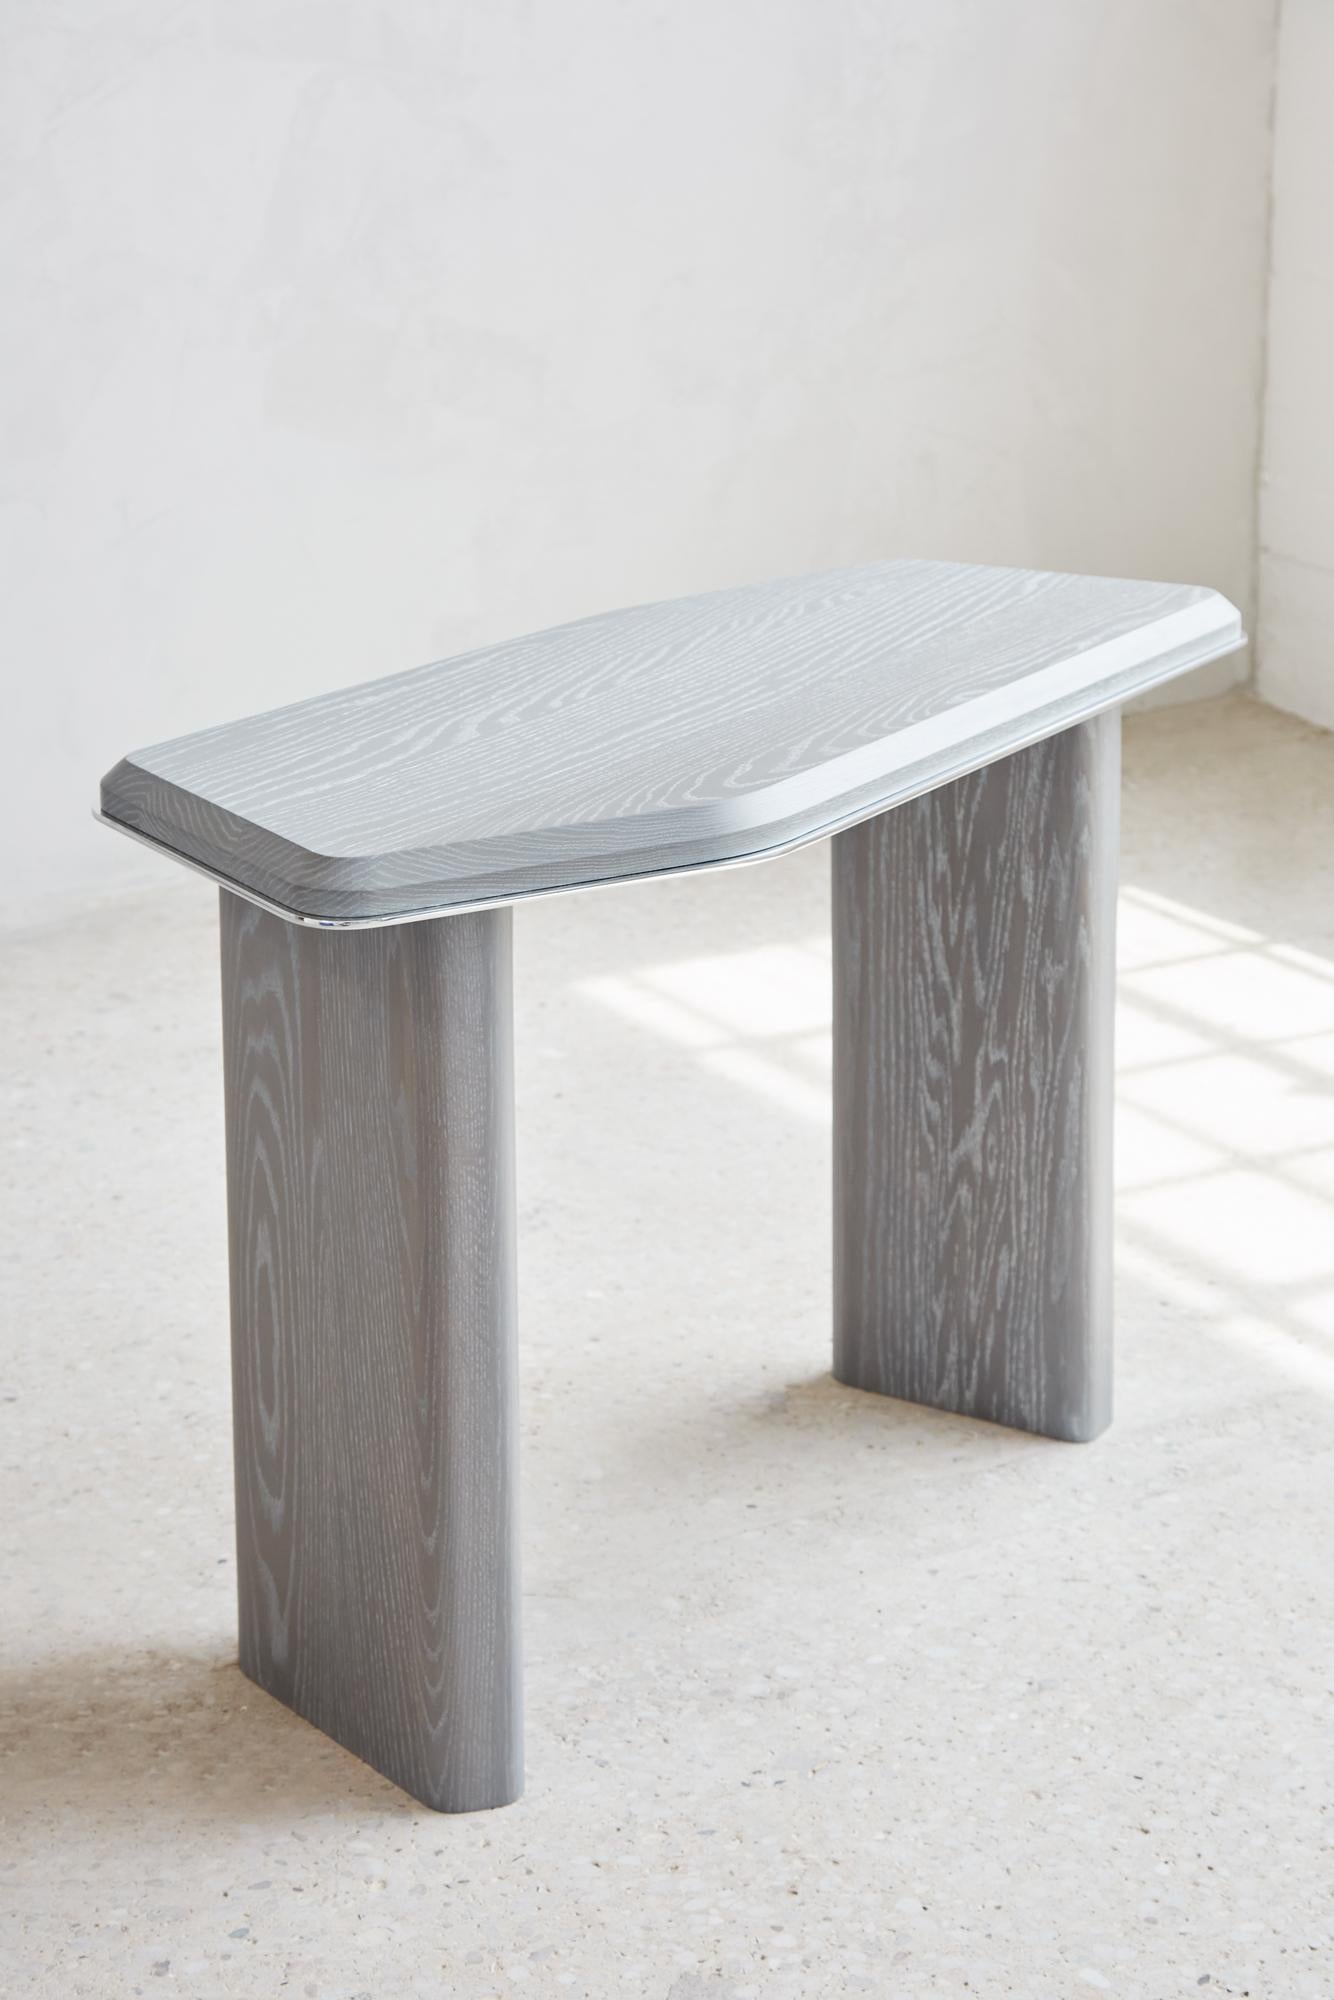 GEOMORPH CONSOLE TABLE
Designed to be used as a console or desk, this piece is inspired by metamorphic rocks that have grown, evolved, and combined with other materials over time. Just as these rock formations incorporate other substances, the